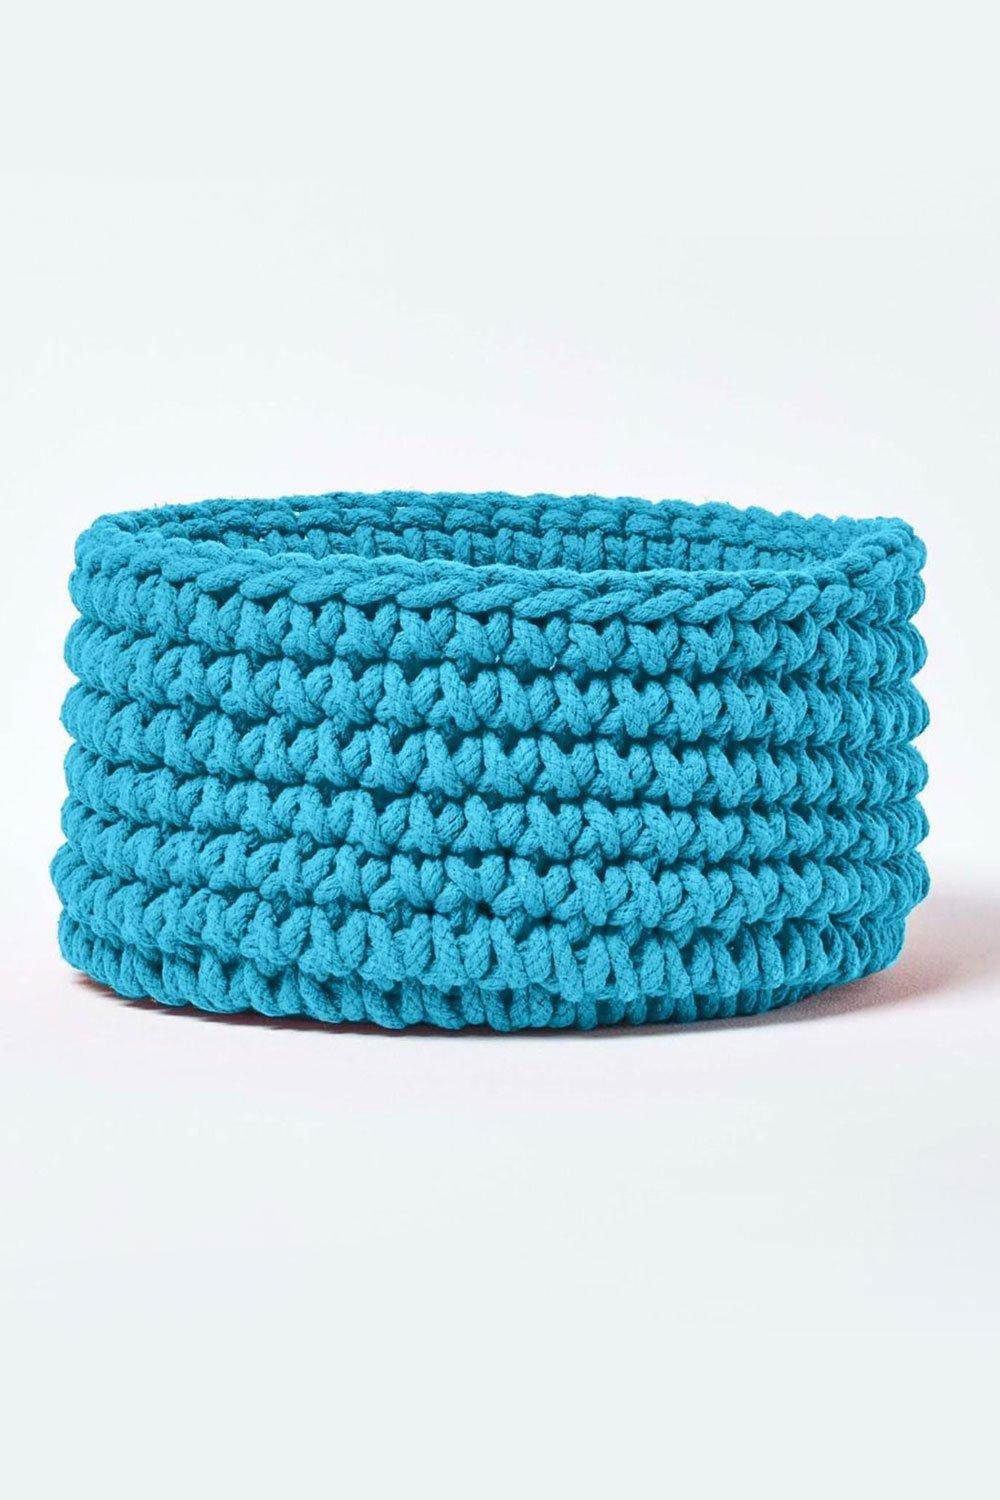 Homescapes Cotton Knitted Round Storage Basket, 37 x 21 cm|teal